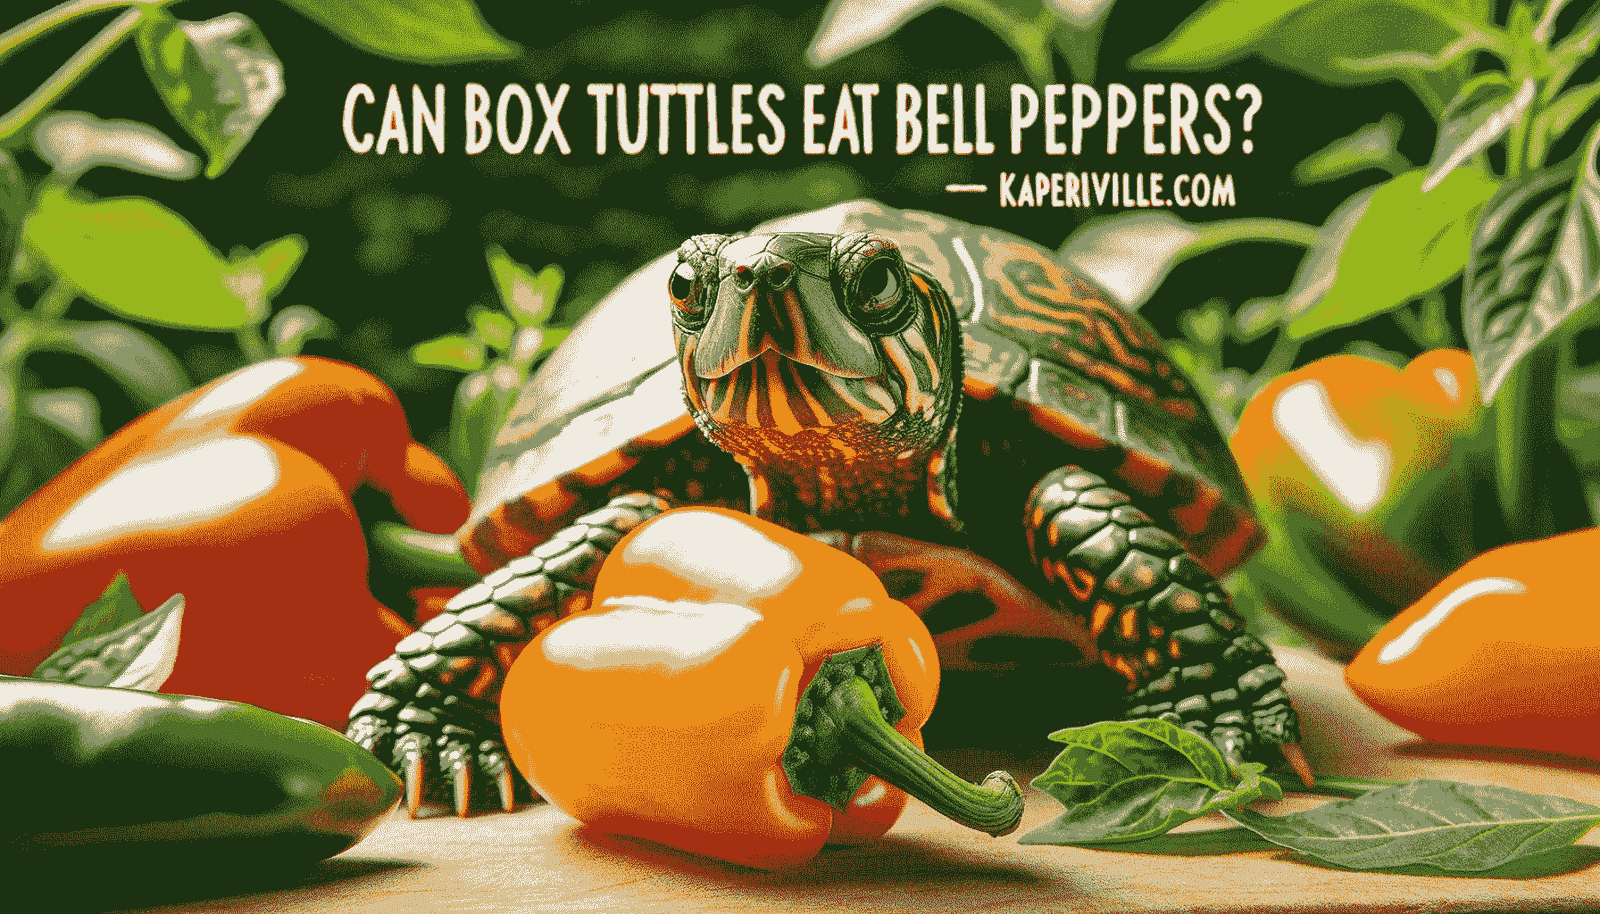 Can Box Turtles Eat Bell Peppers